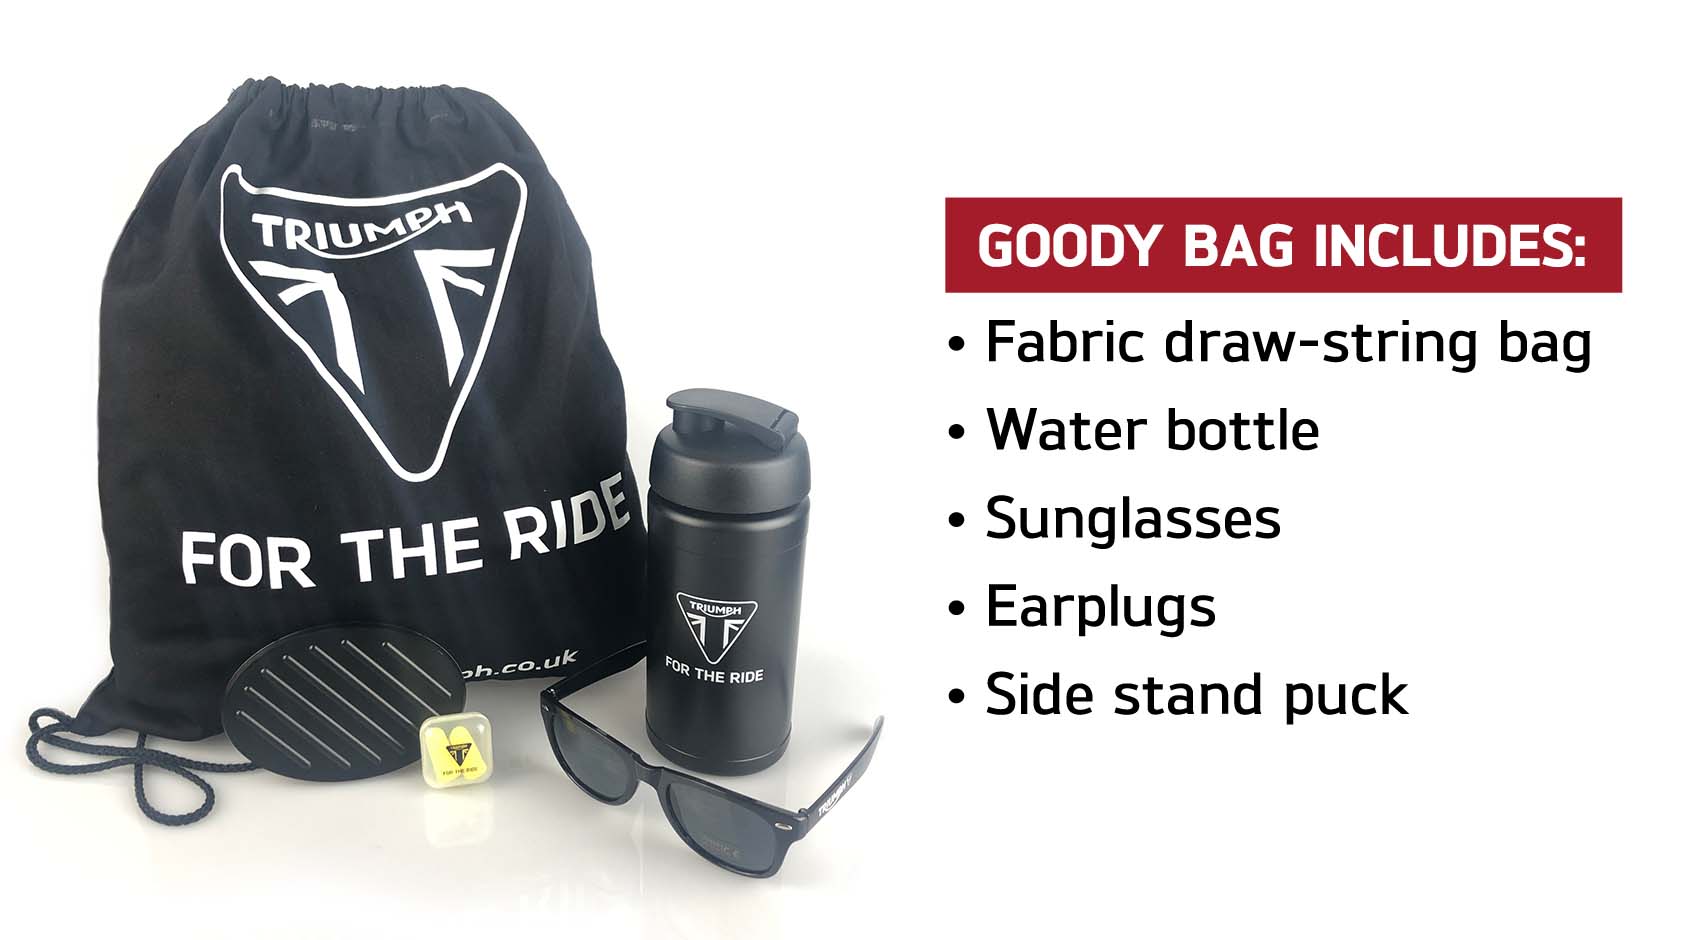 Claim your free goody bag after your test ride at our Laguna Motorcycles Triumph Demo Day